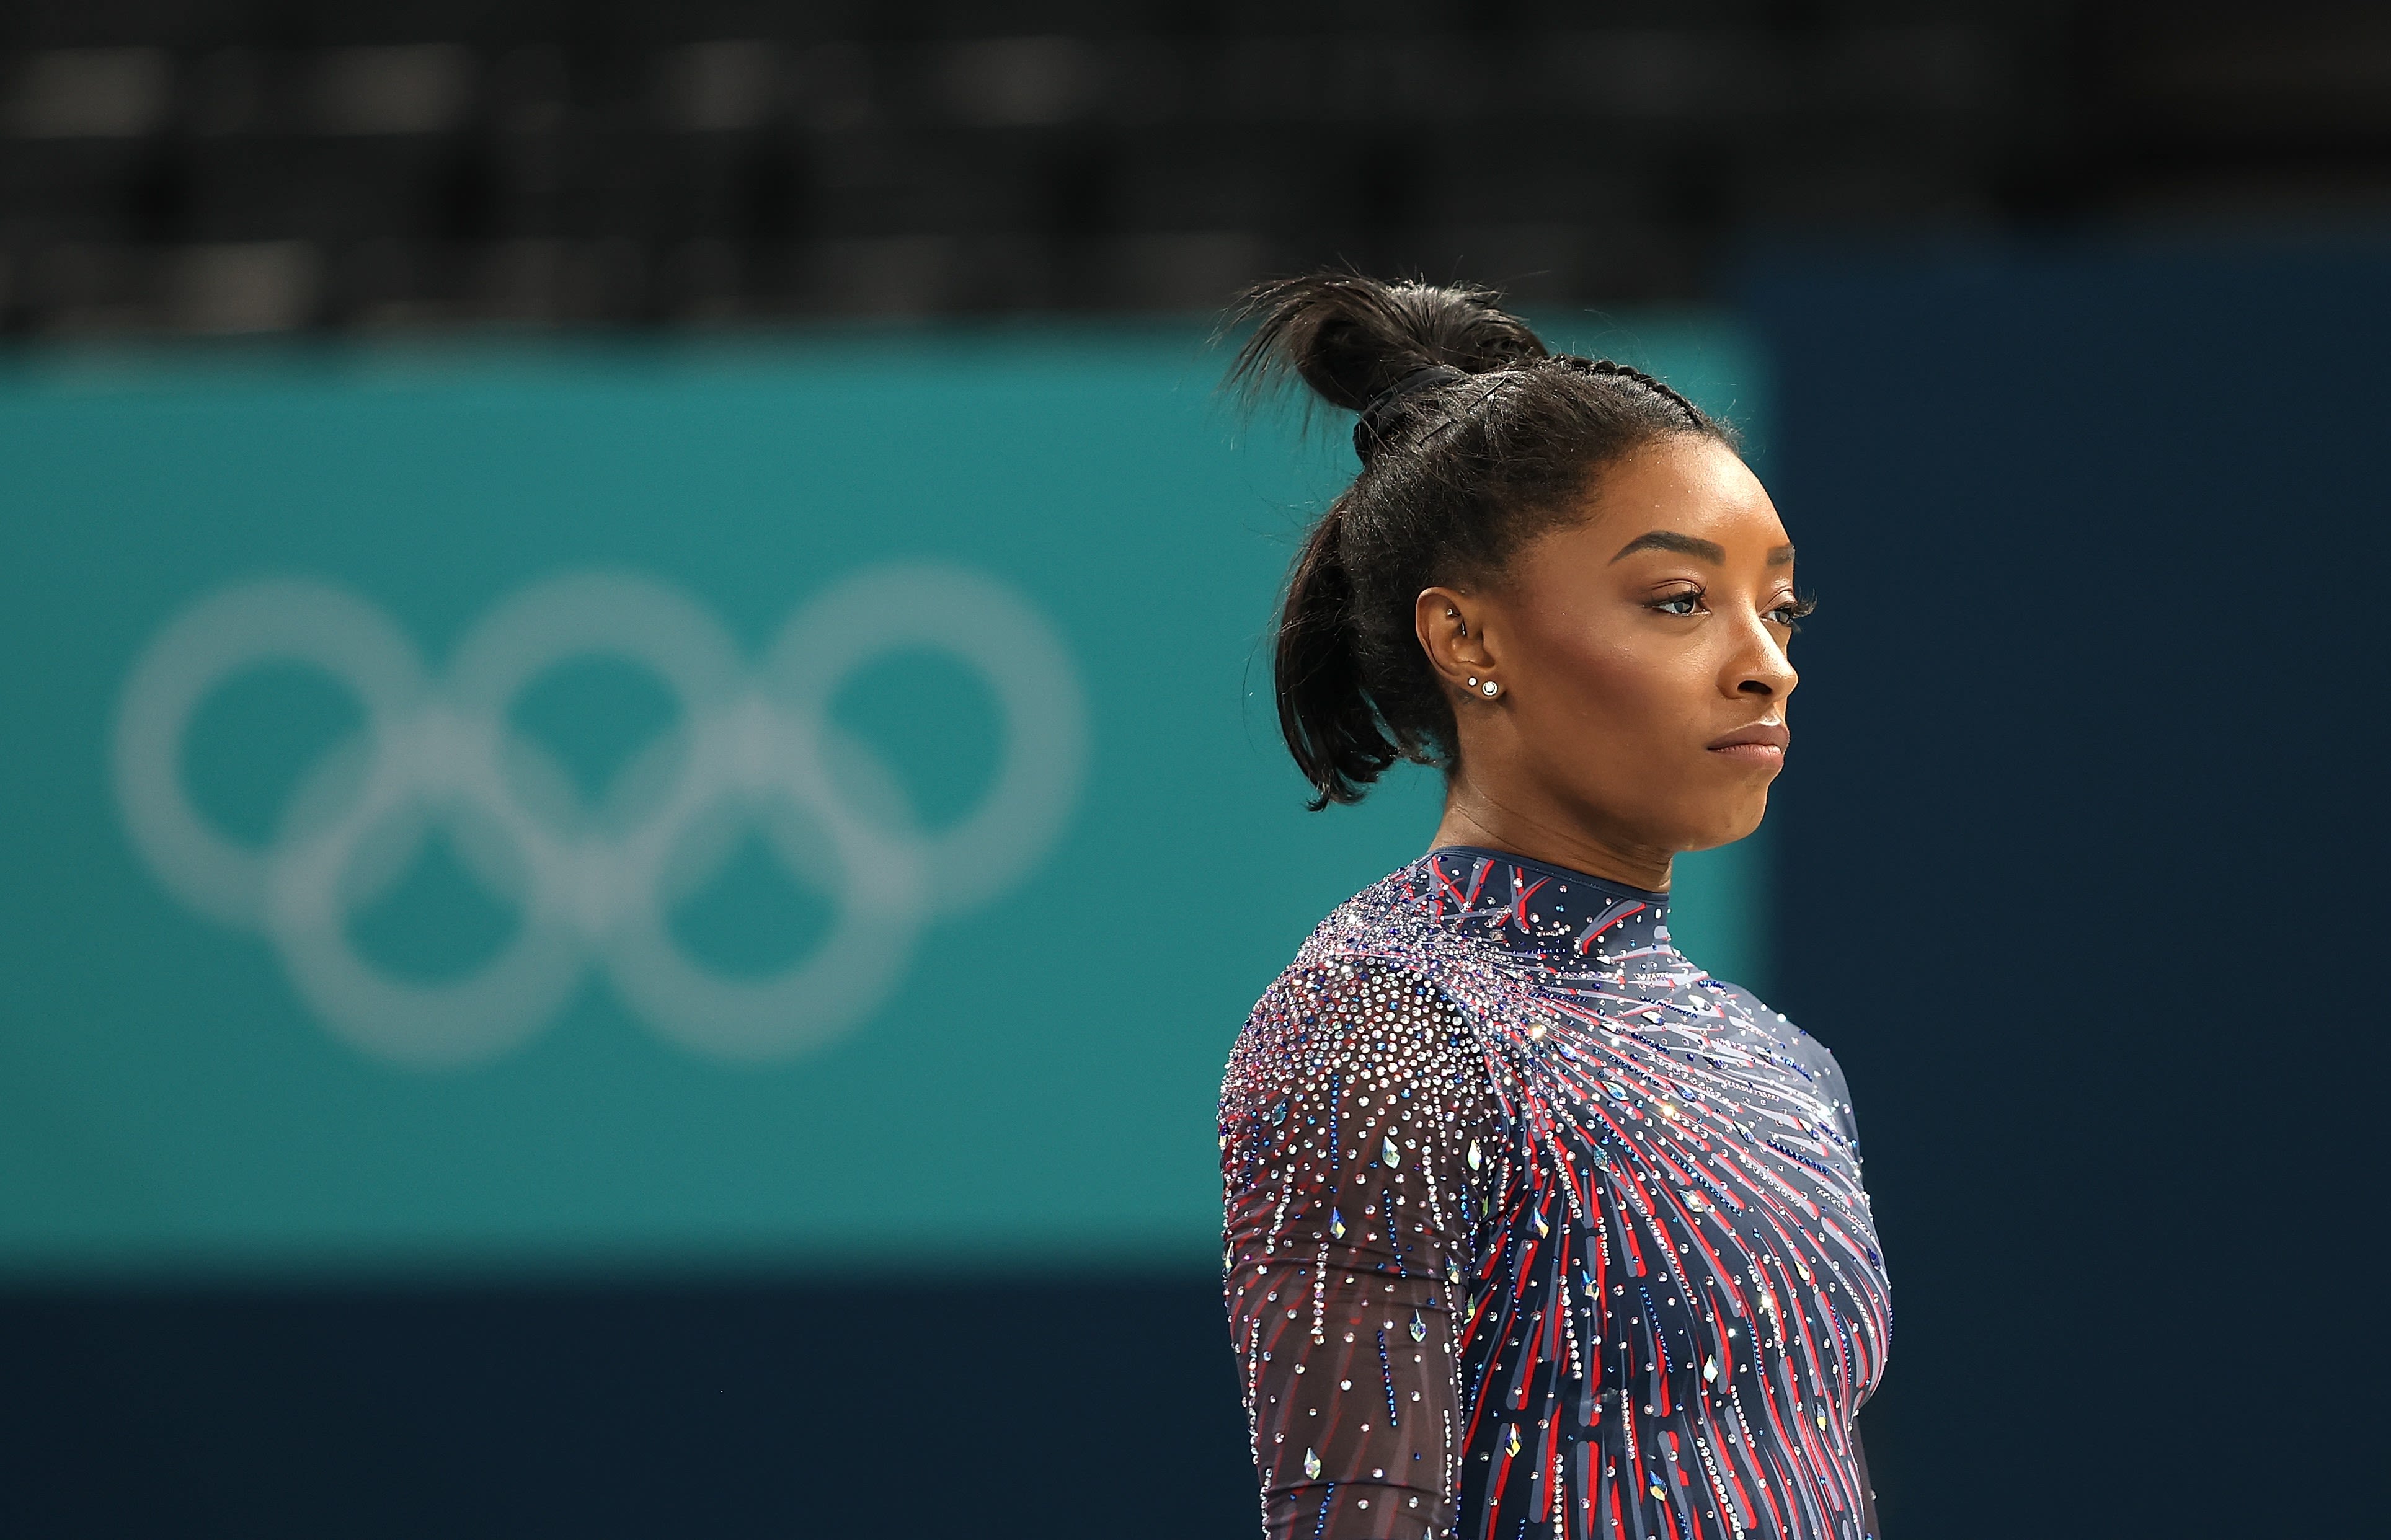 2024 Olympic schedule for July 28: LeBron James and Team USA, Simone Biles highlight Sunday's action in Paris